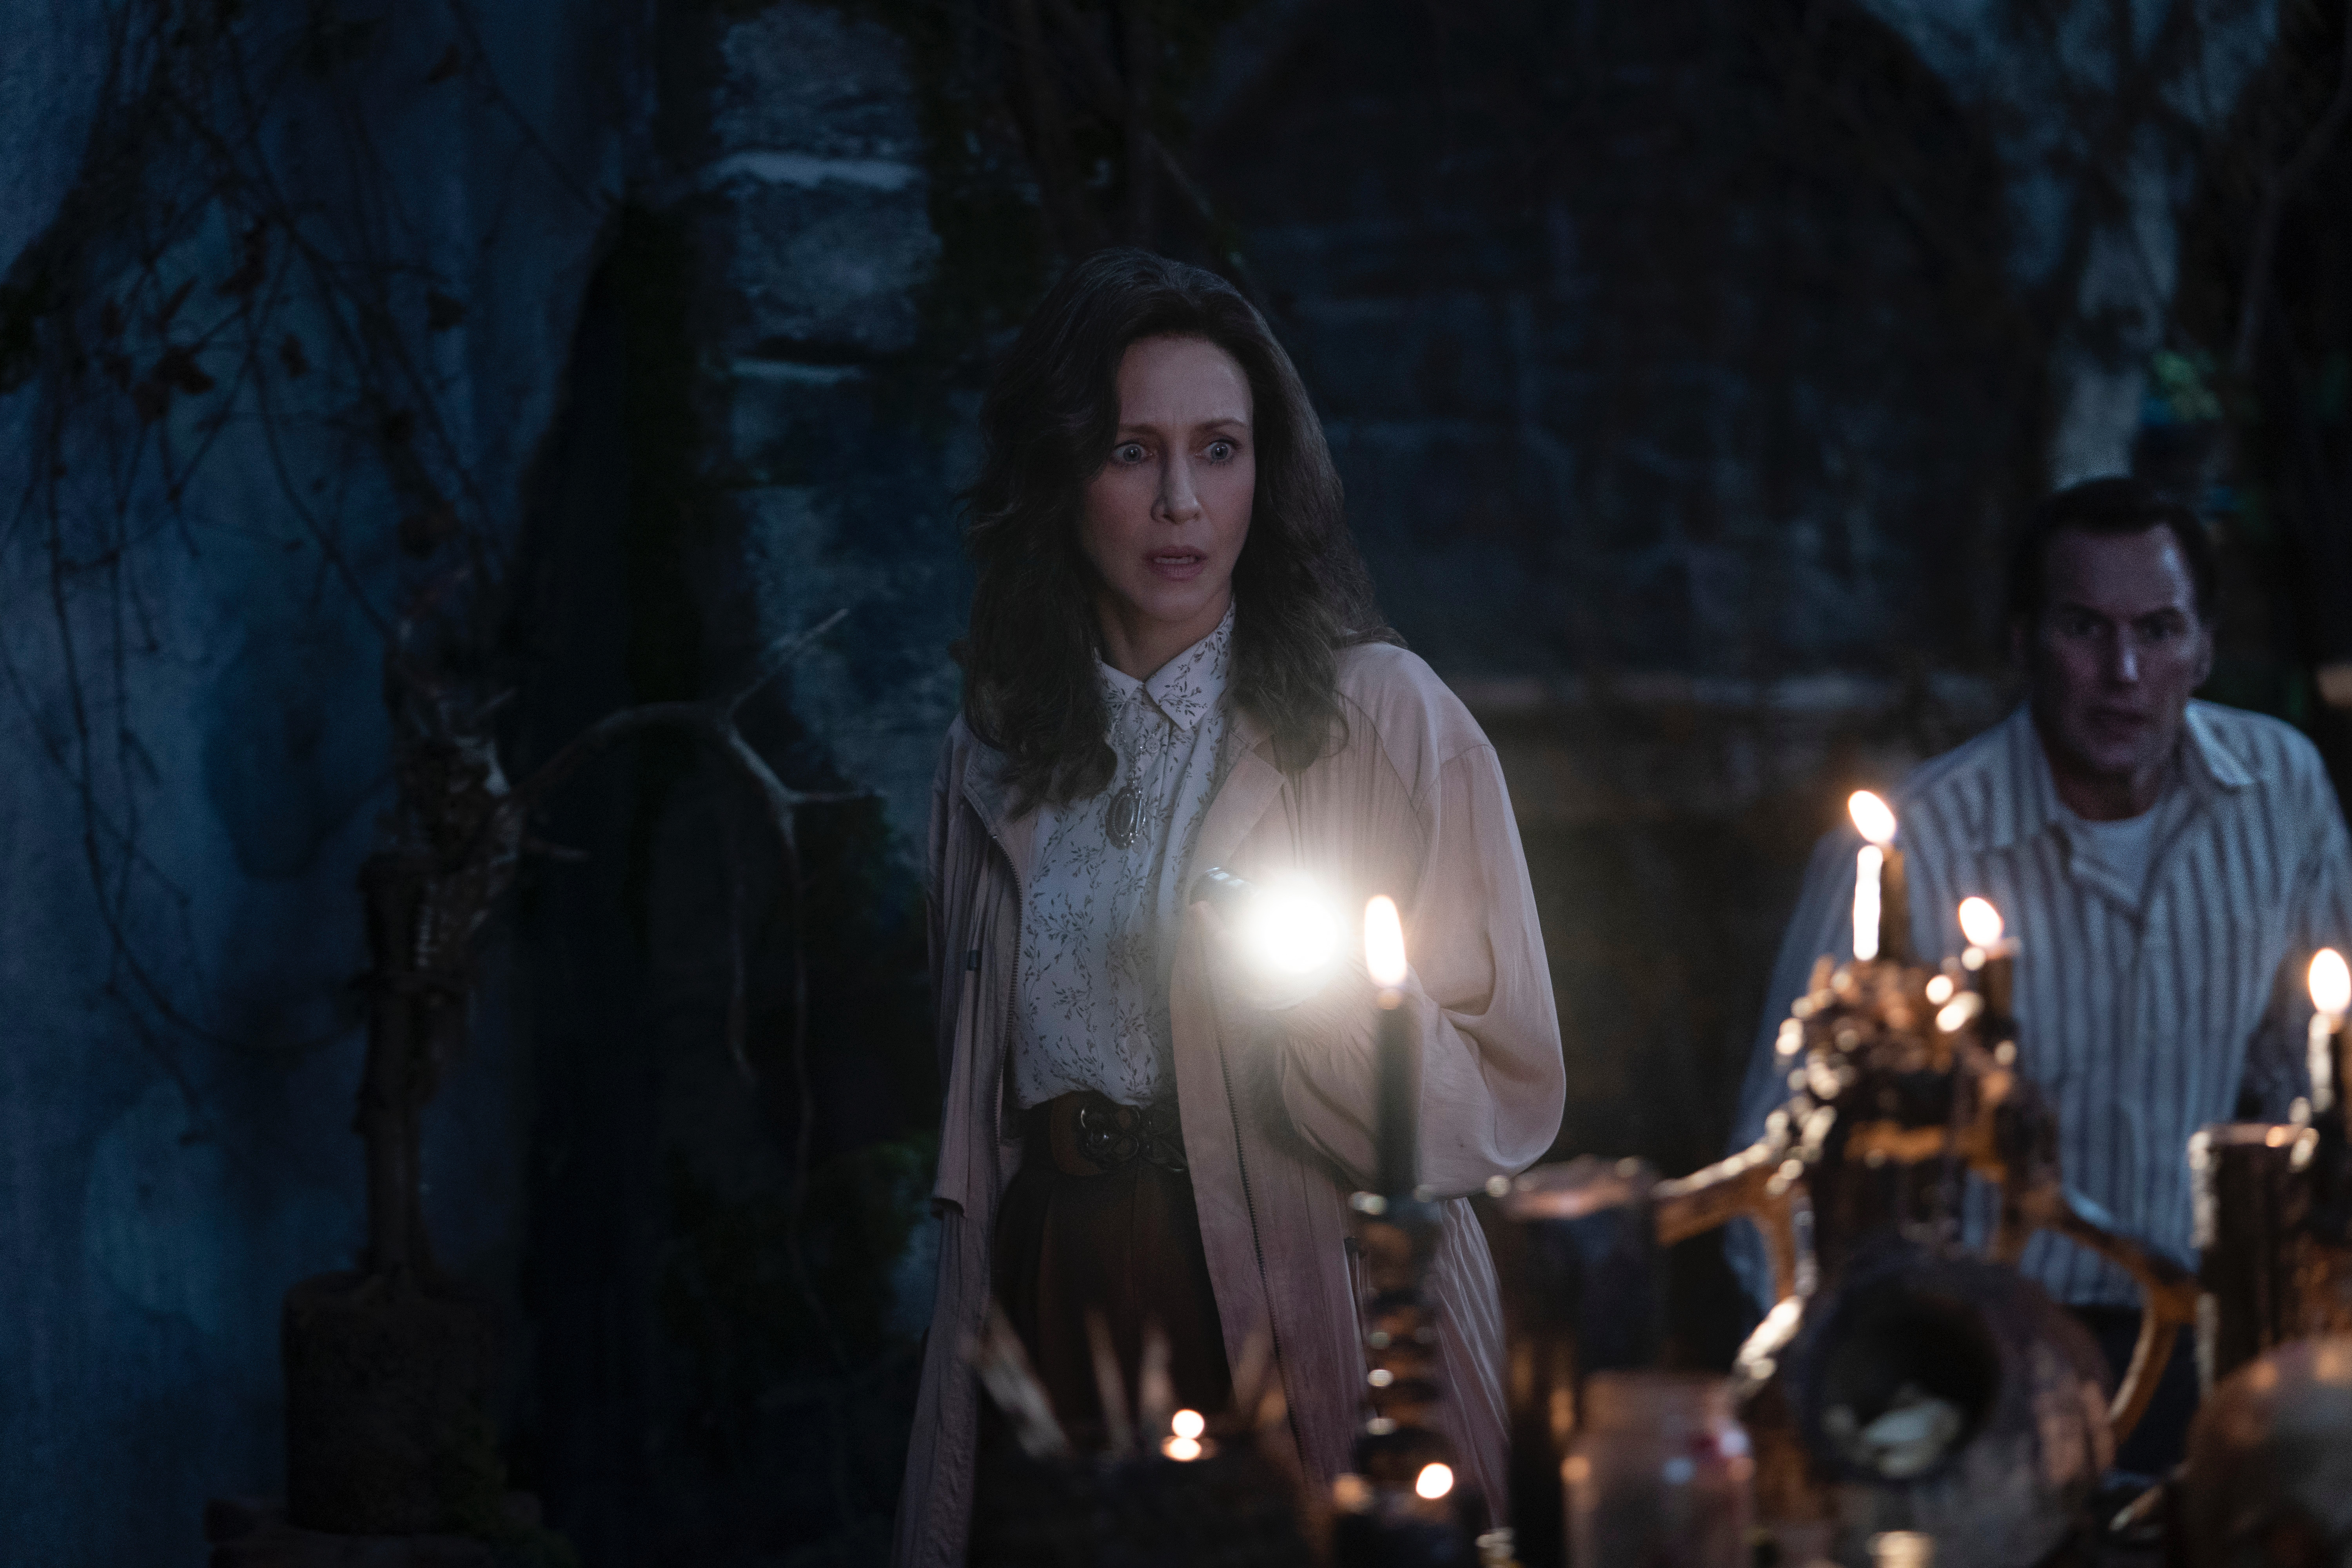 the conjuring 2 full movie online free streaming